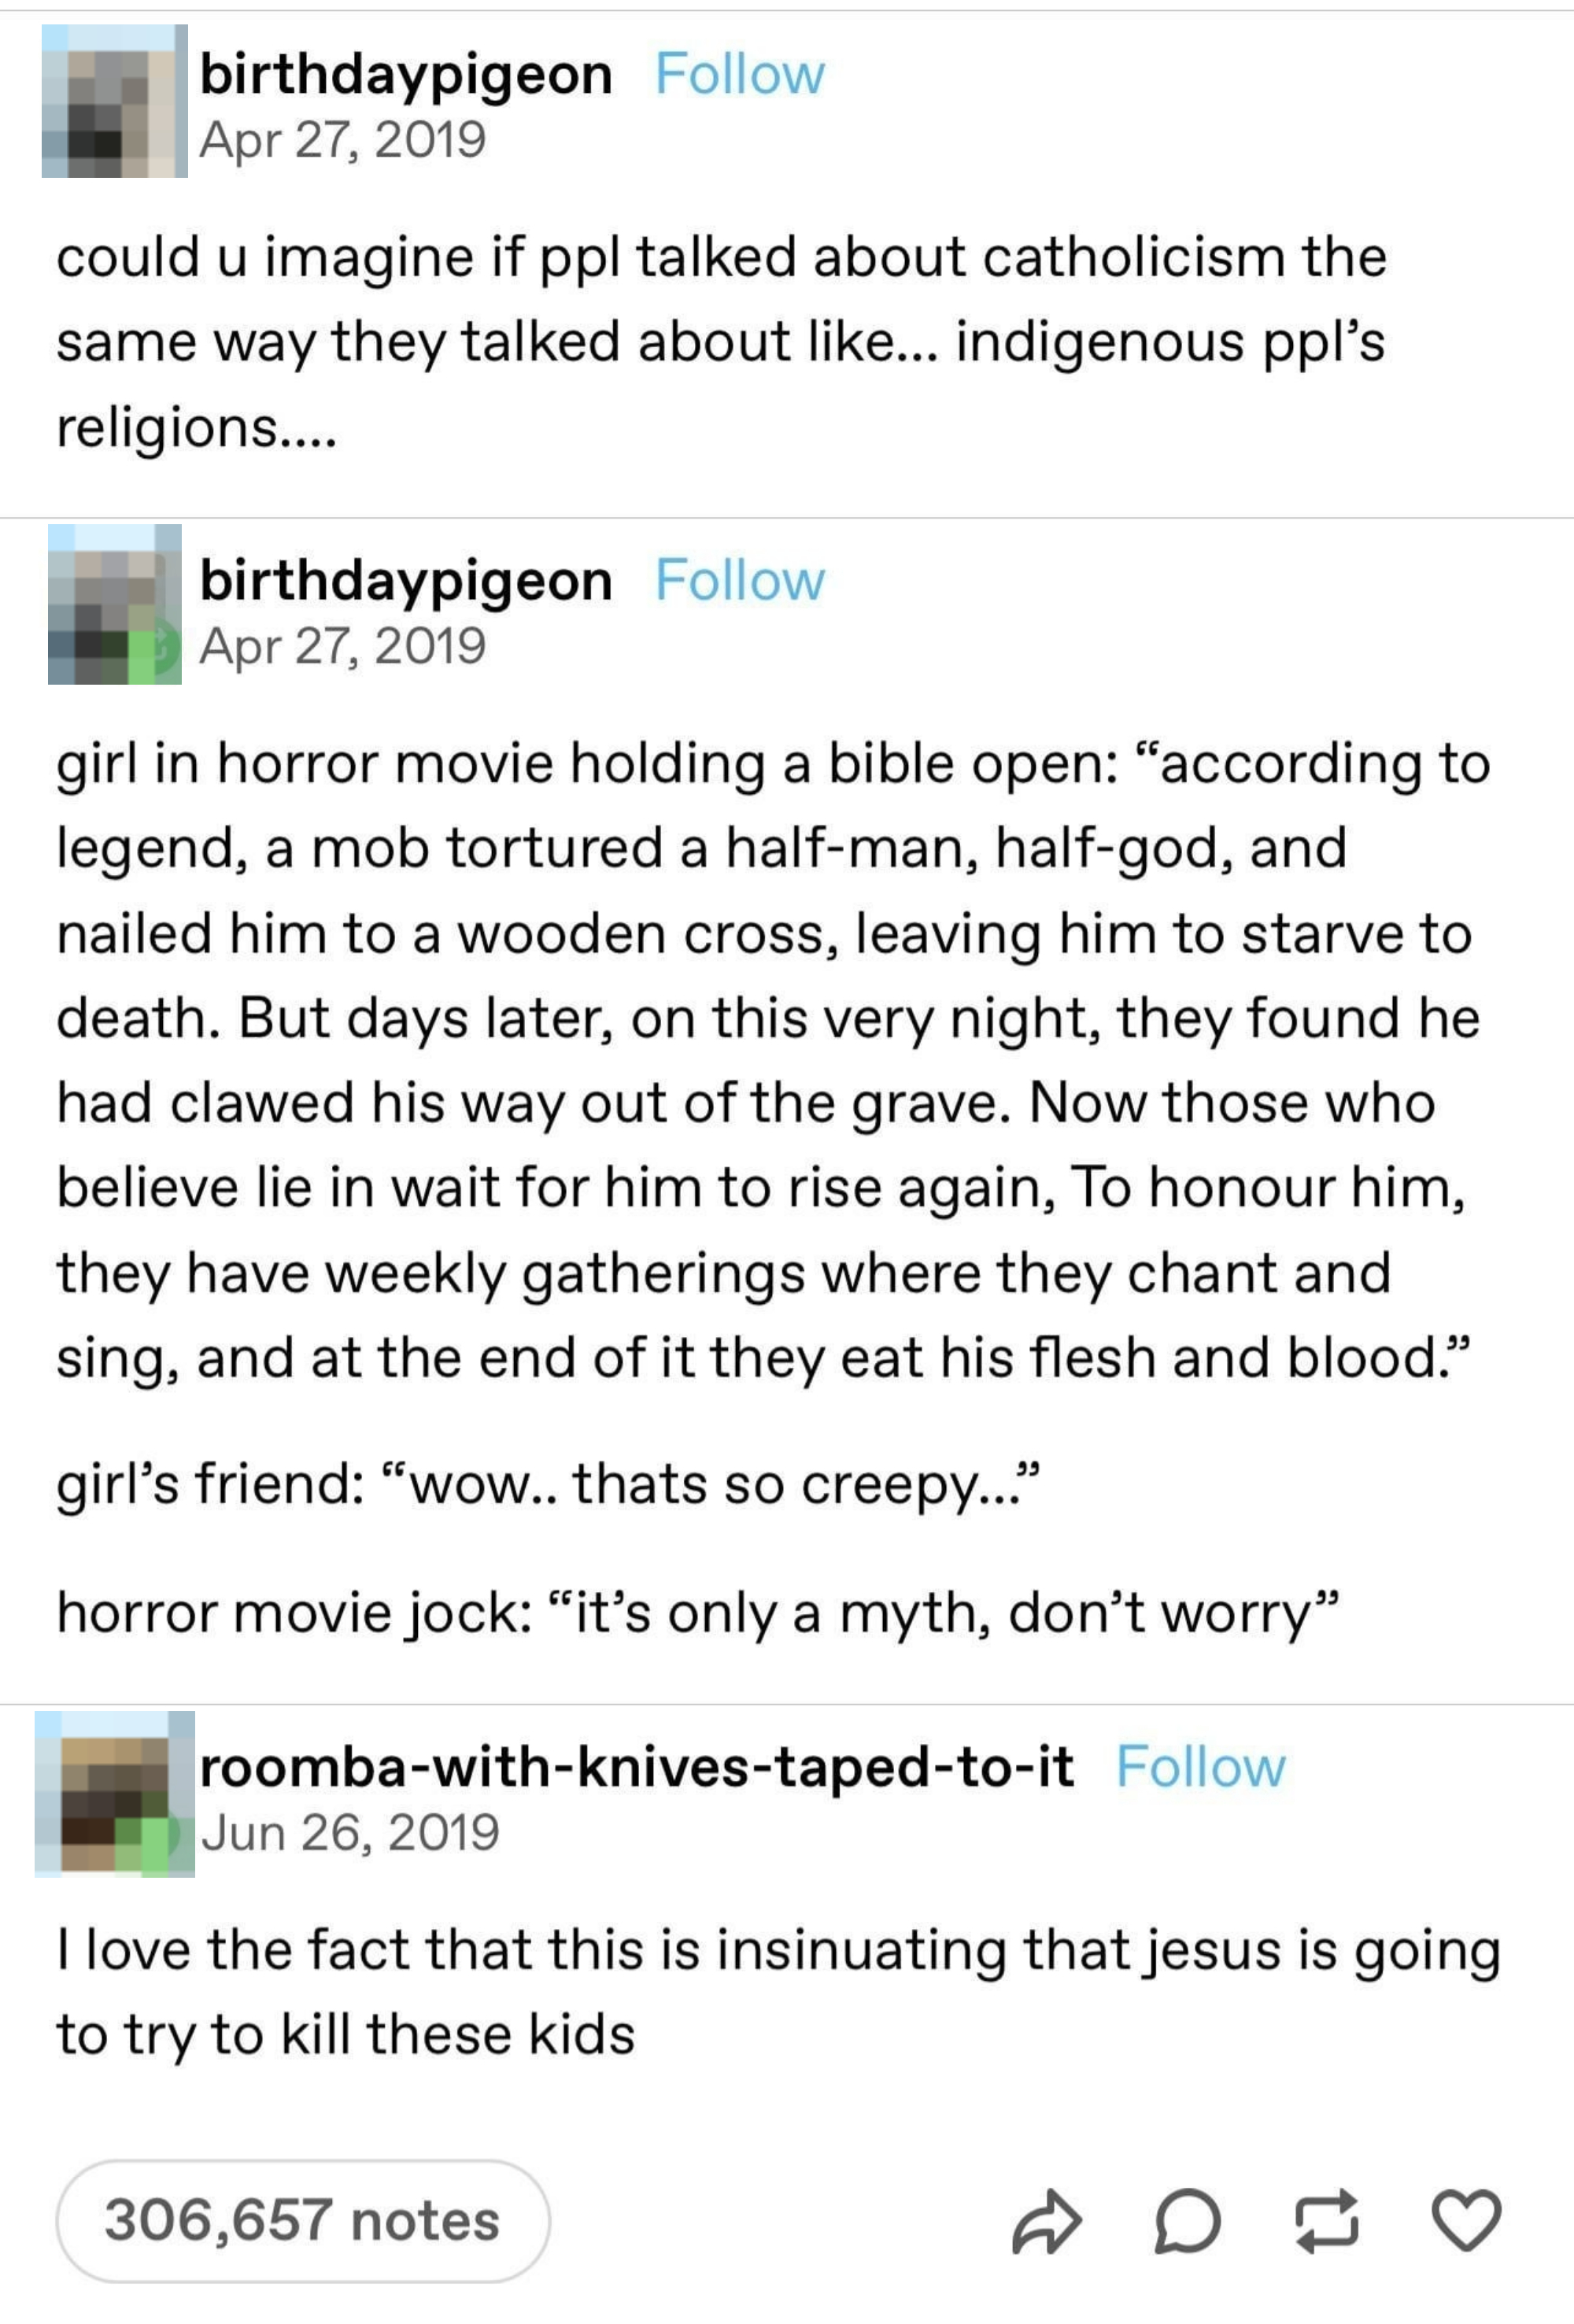 Image summary: A series of social media posts discussing a children&#x27;s movie scene with religious undertones